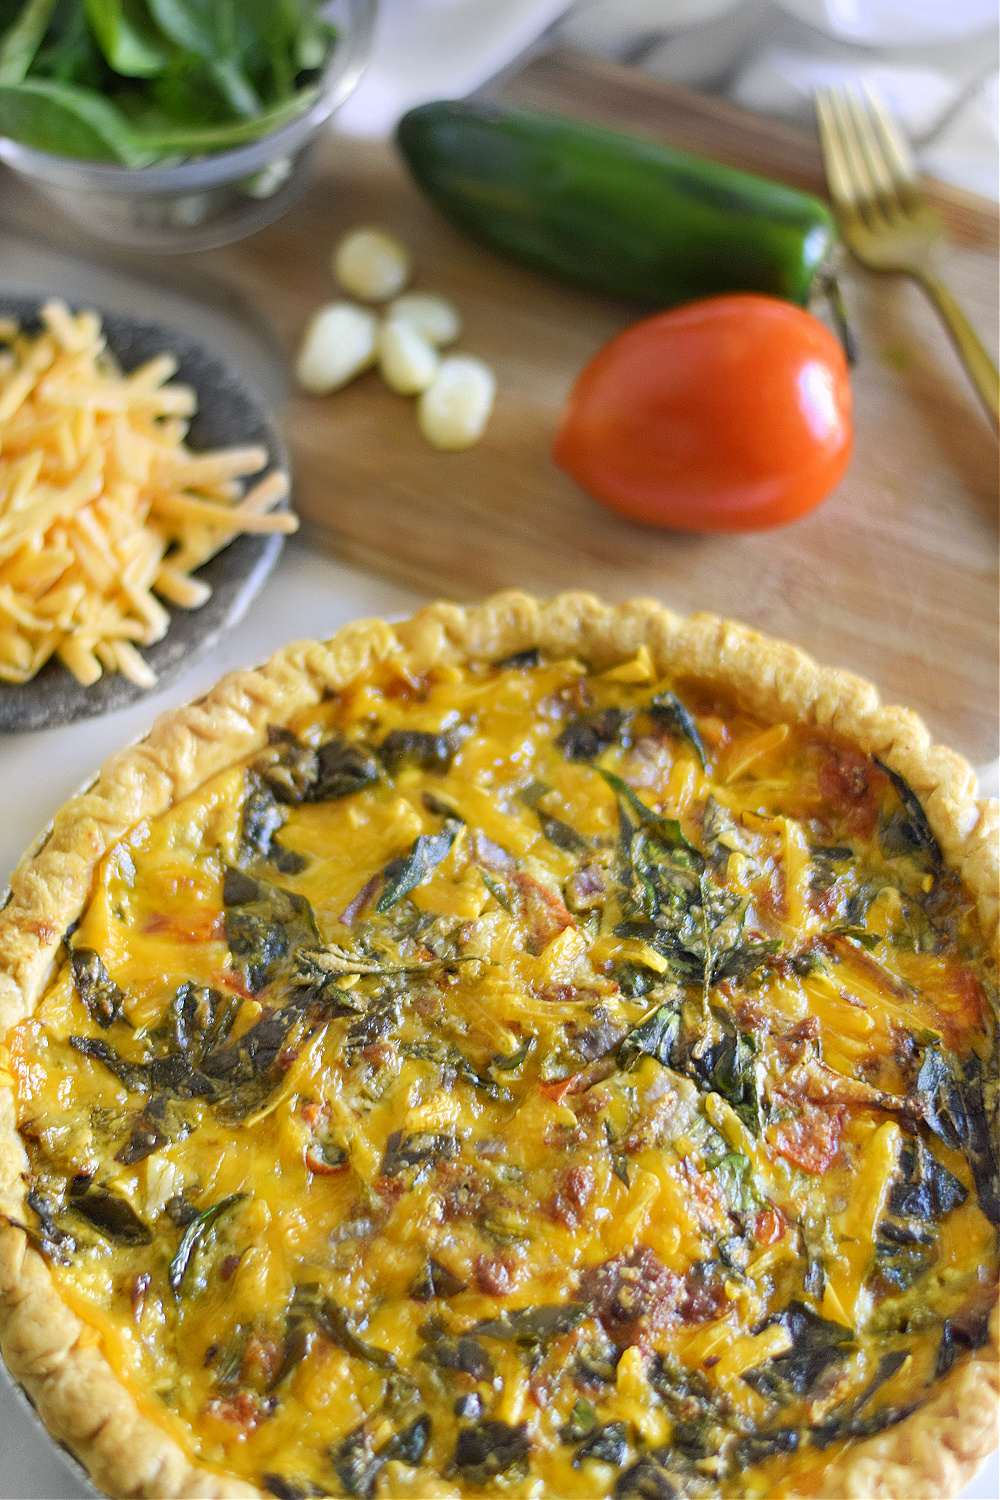 Impossible Sausage Quiche with Cheddar and Vegetables